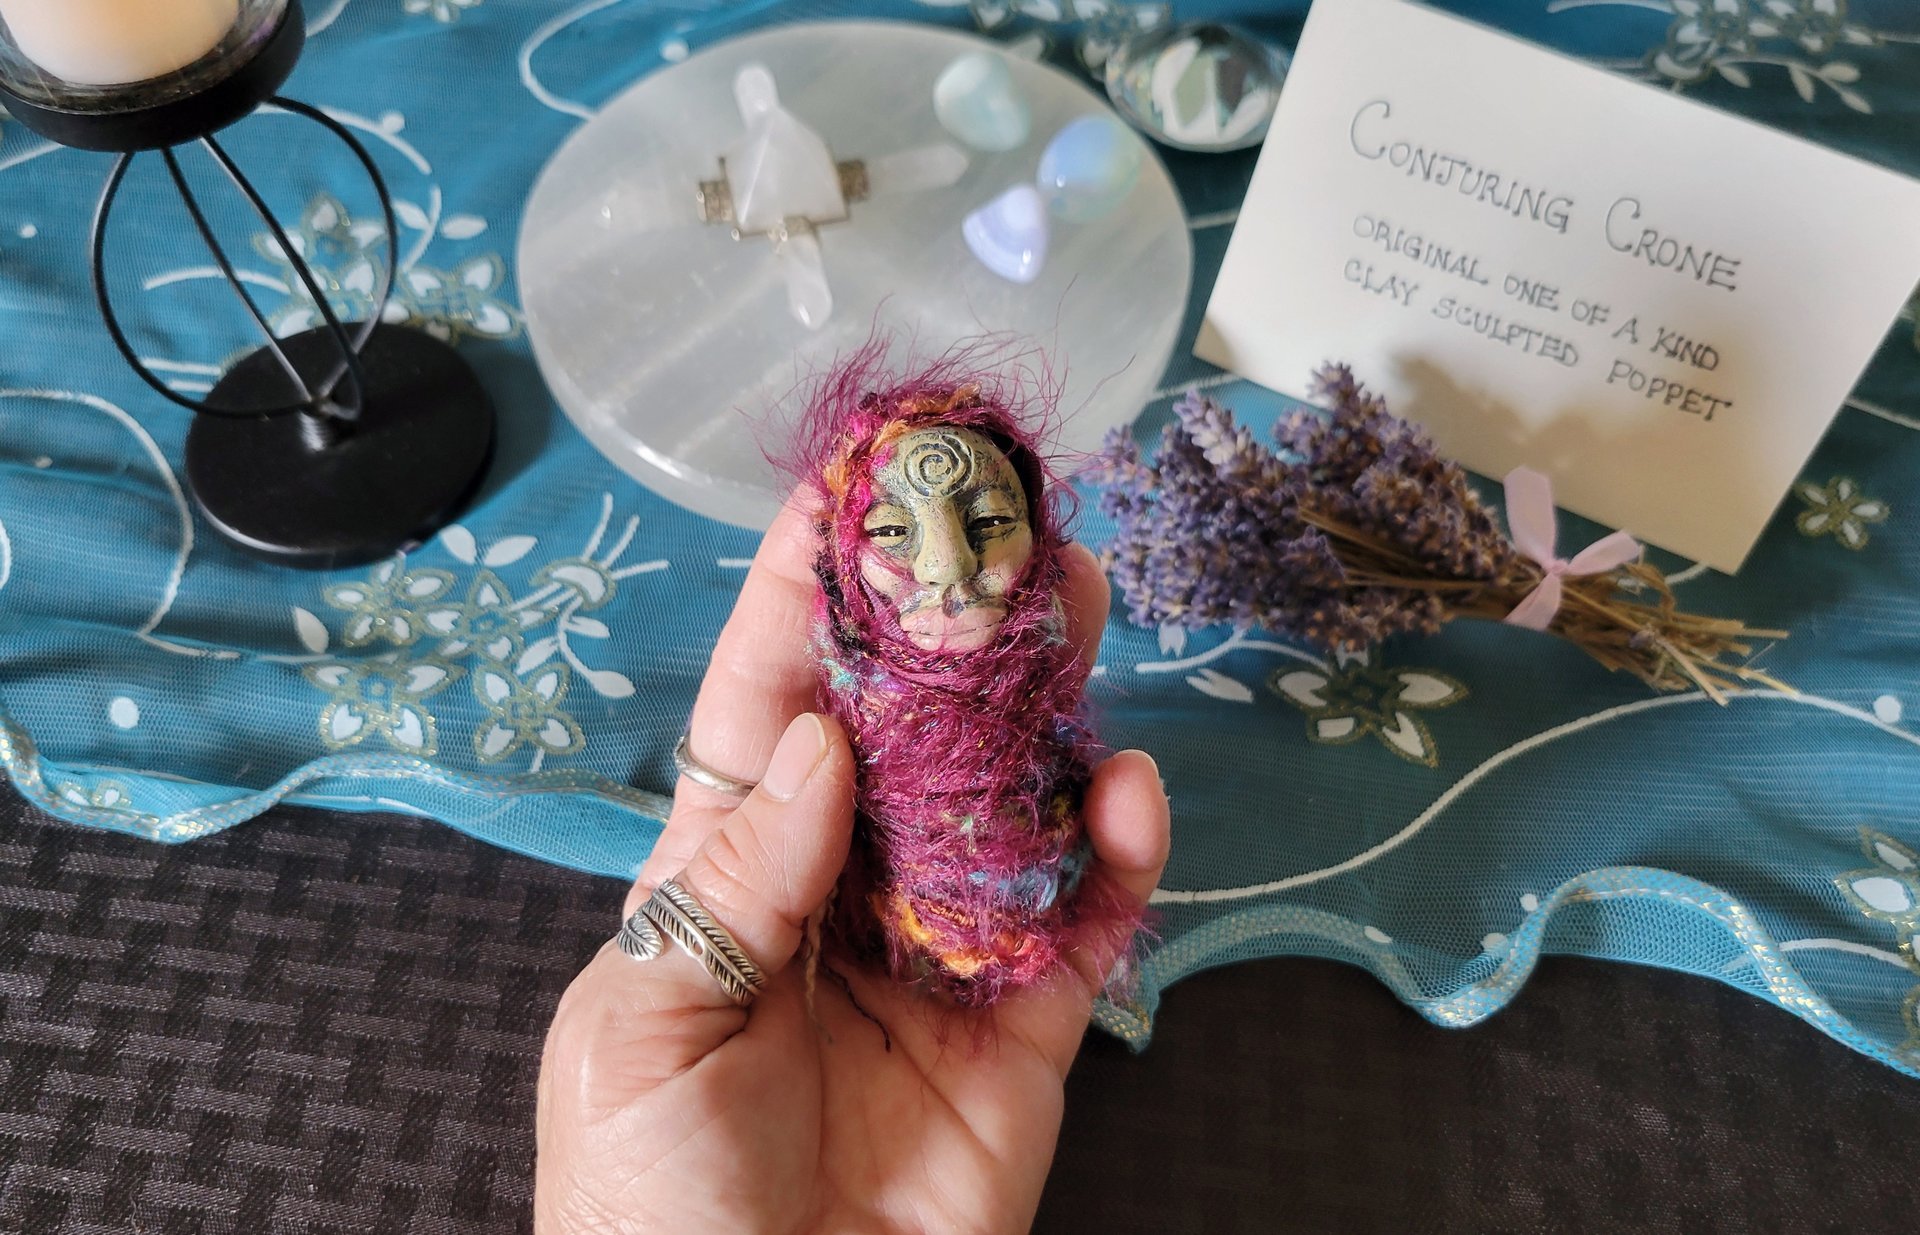 Conjuring Crone - OOAK Clay Poppet with Fabric Pouch 